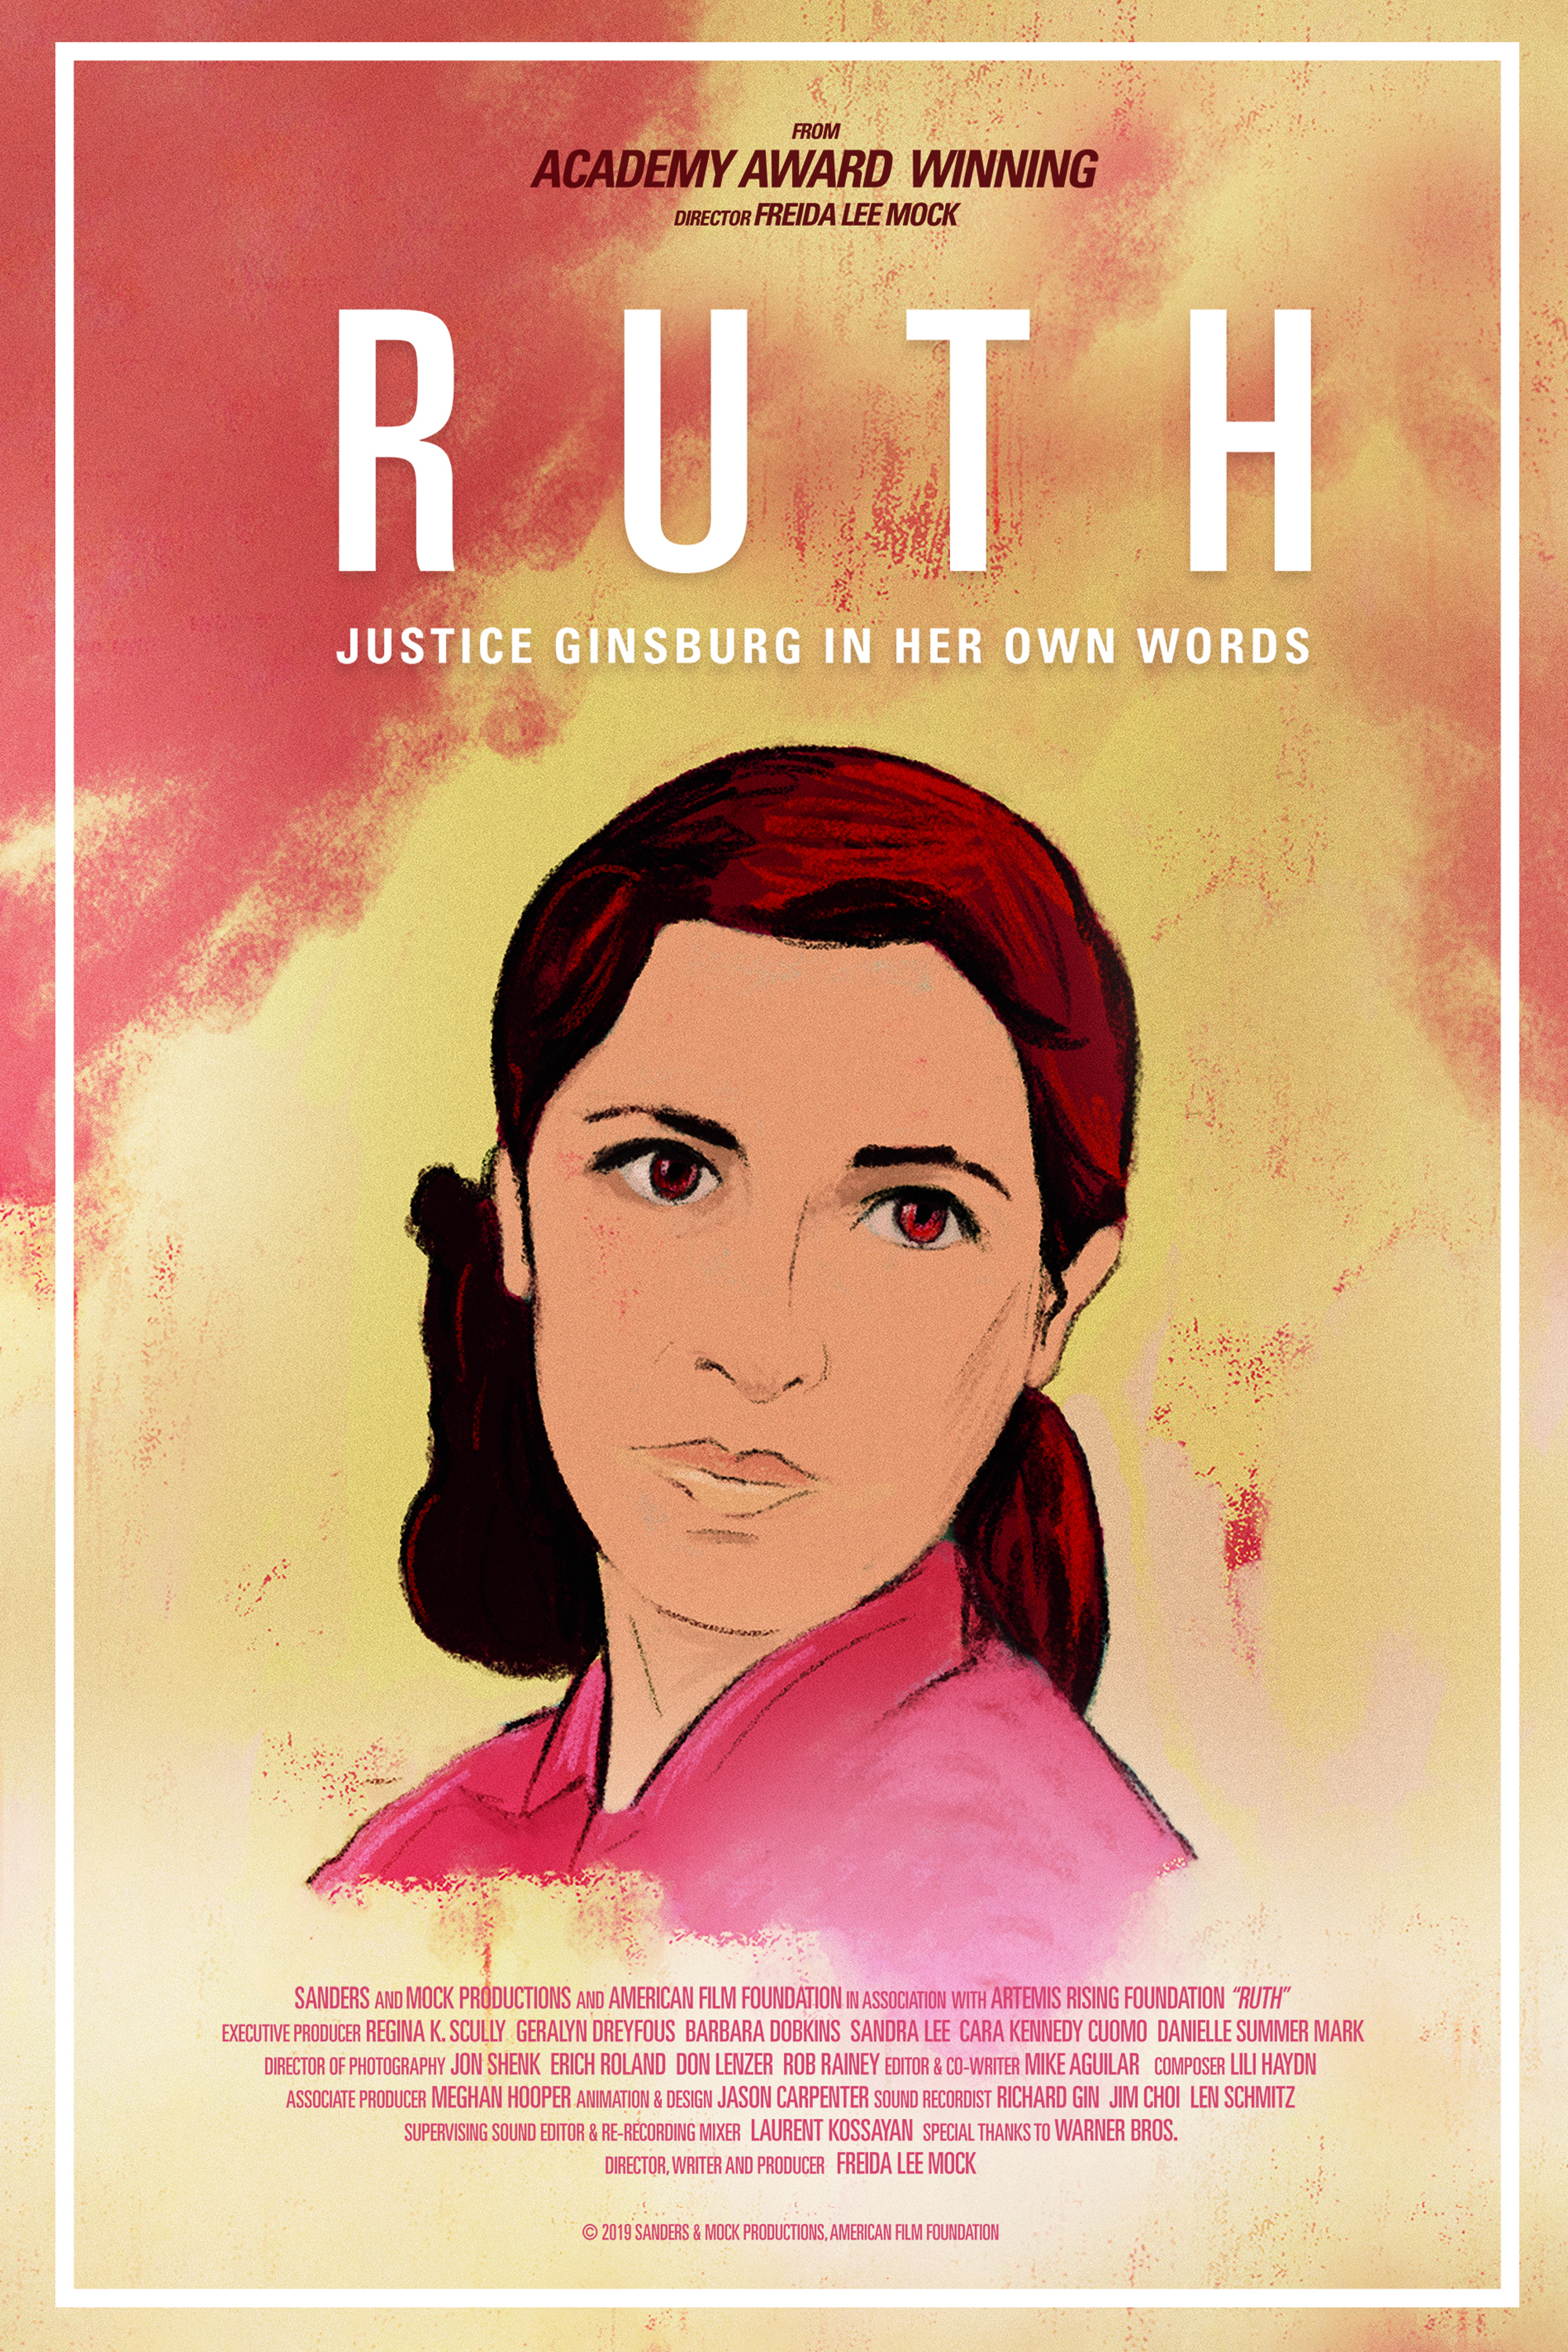 RUTH - Justice Ginsburg in Her Own Words